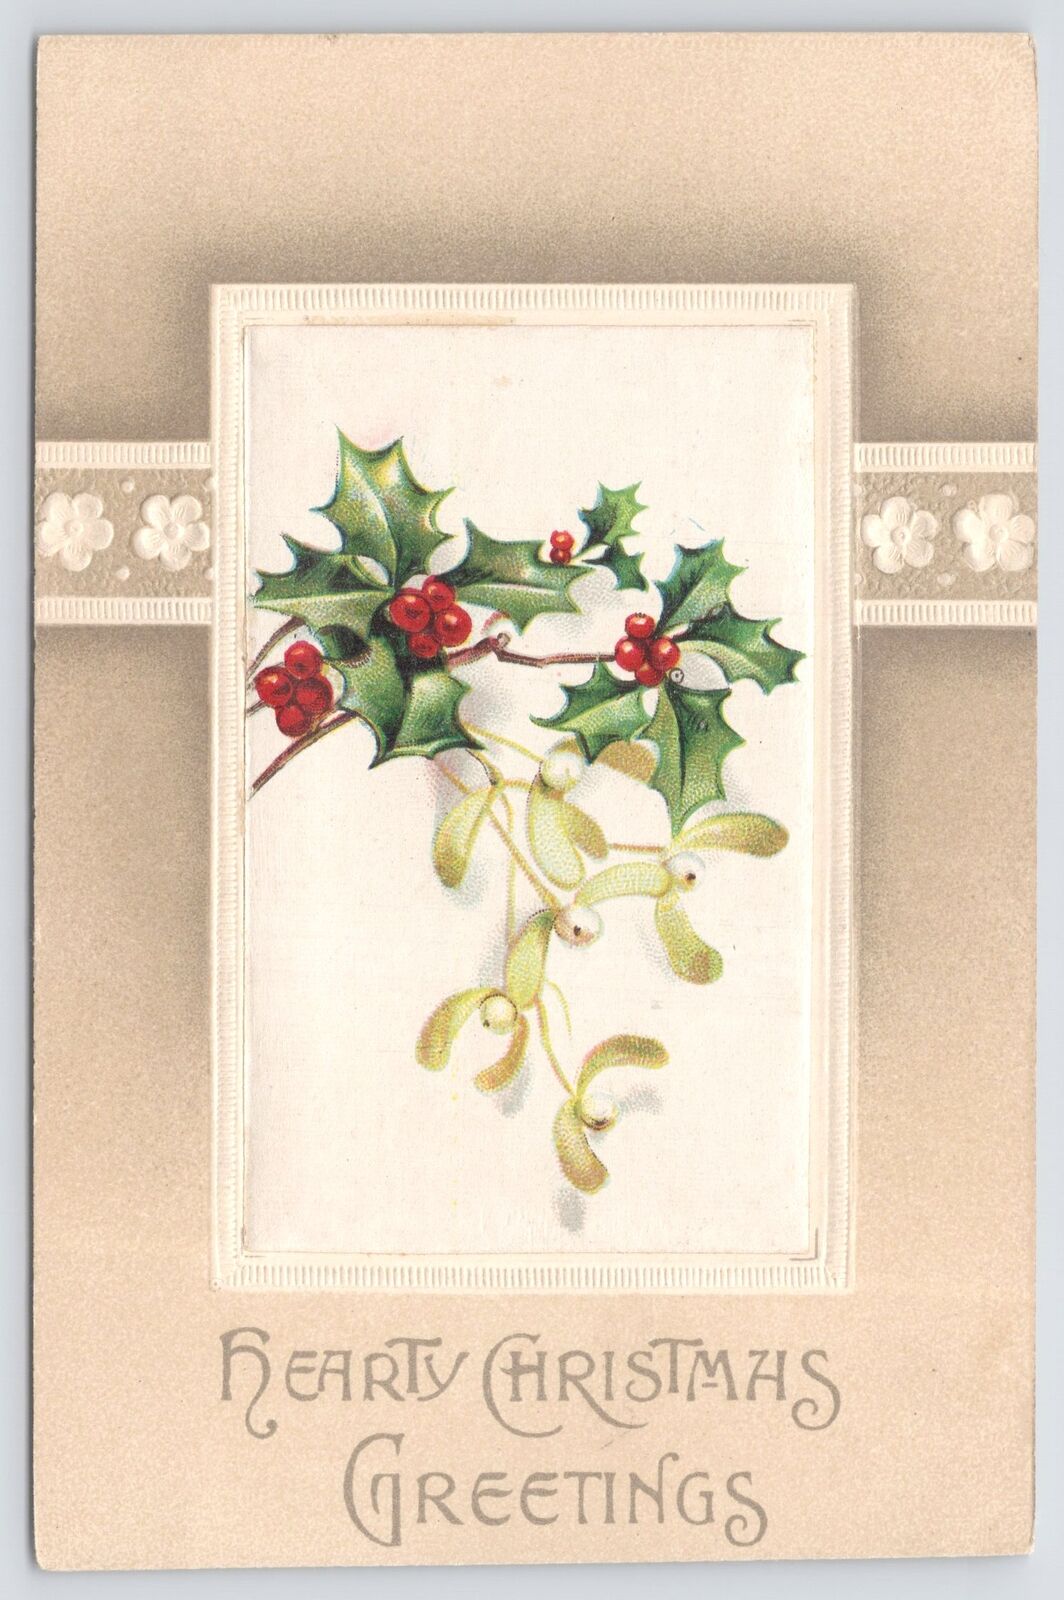 Holiday~Hearty Christmas Greetings~Mistletoe~Holly Berries~Mantle~Floral~Vintage